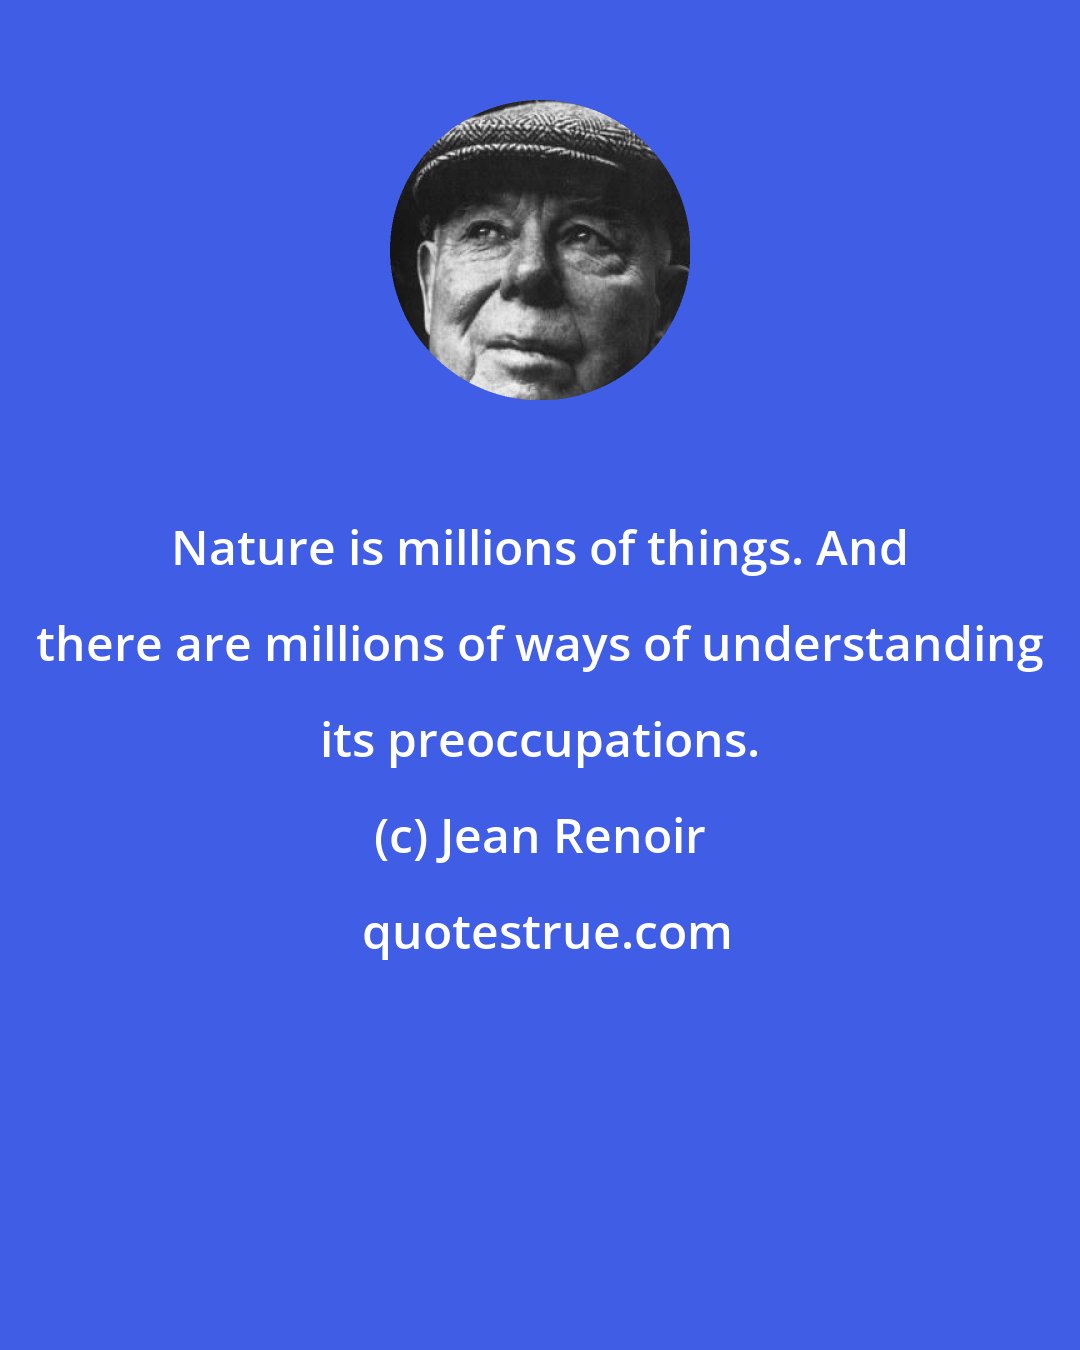 Jean Renoir: Nature is millions of things. And there are millions of ways of understanding its preoccupations.